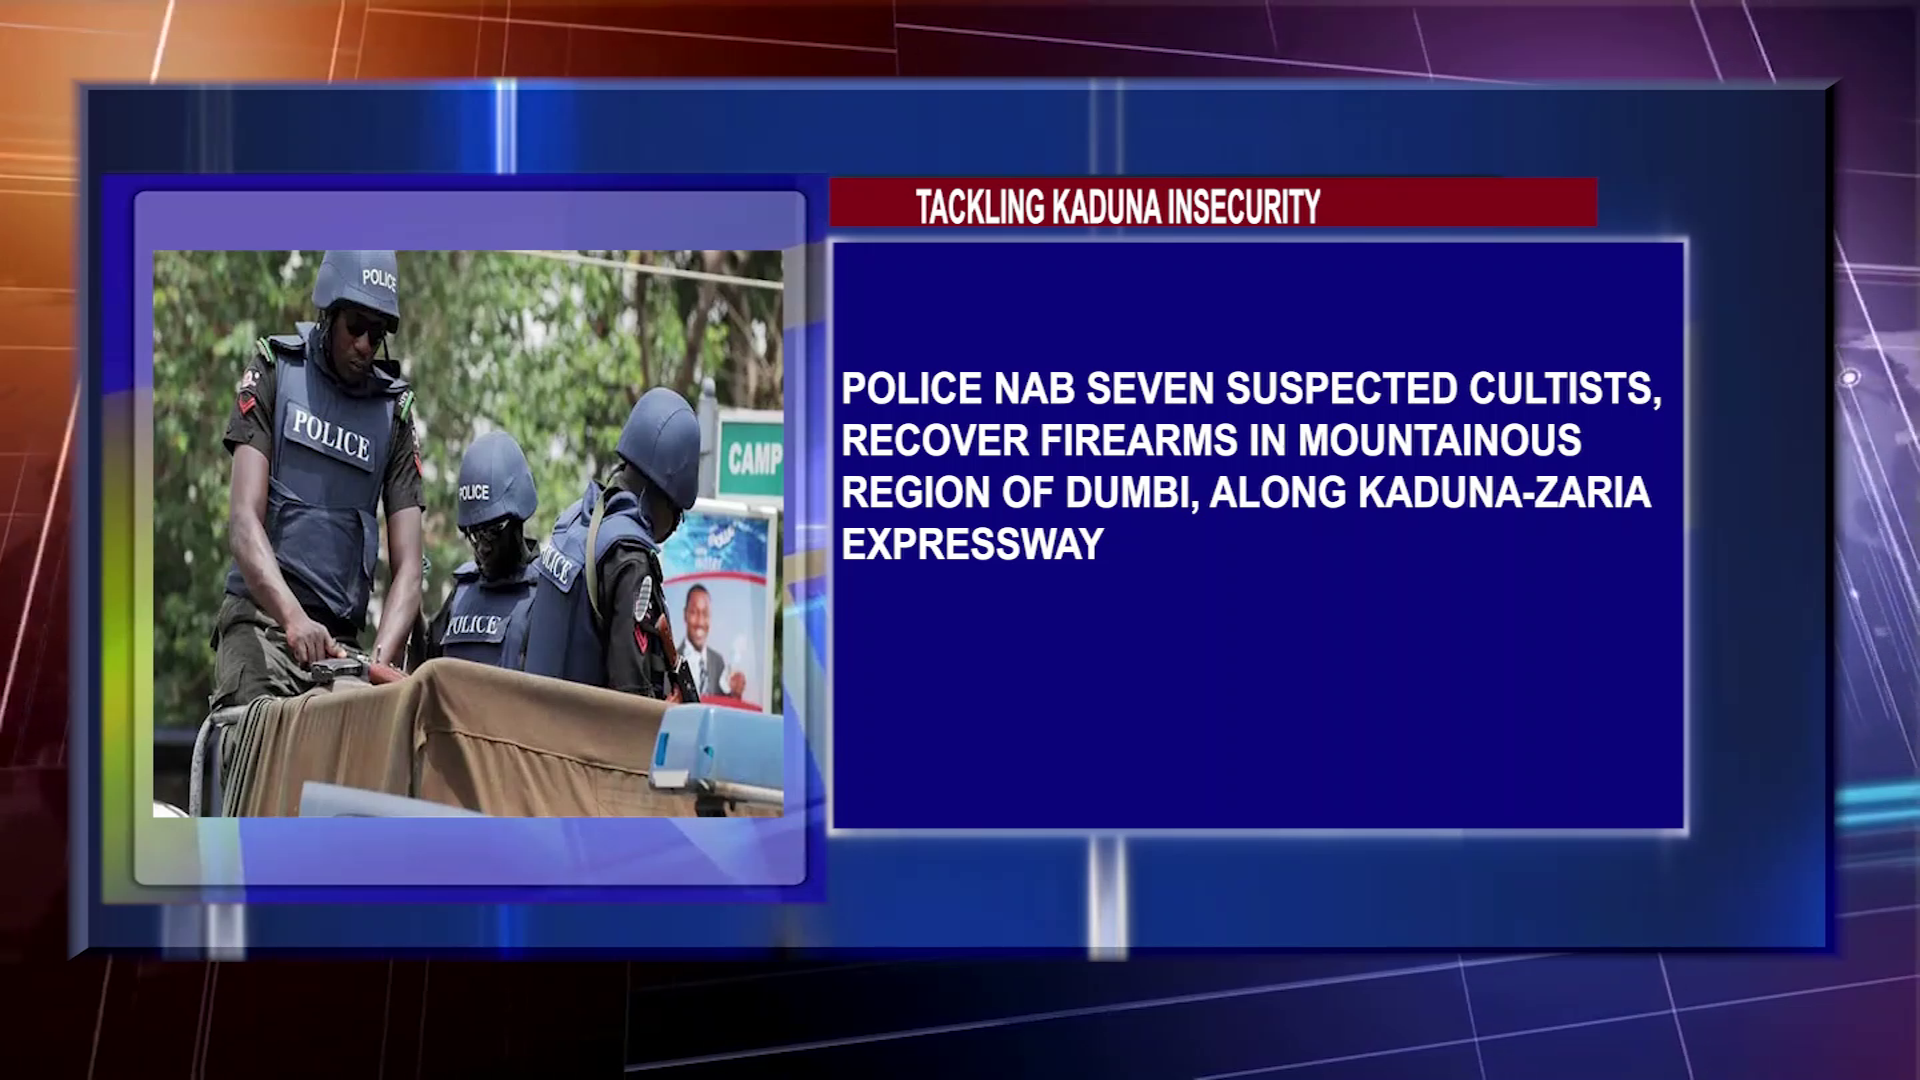 Police Nab Seven Suspected Cultists, Recover Firearms In Mountainous Region Of Dumbi, Along Kaduna-Zaria Expressway